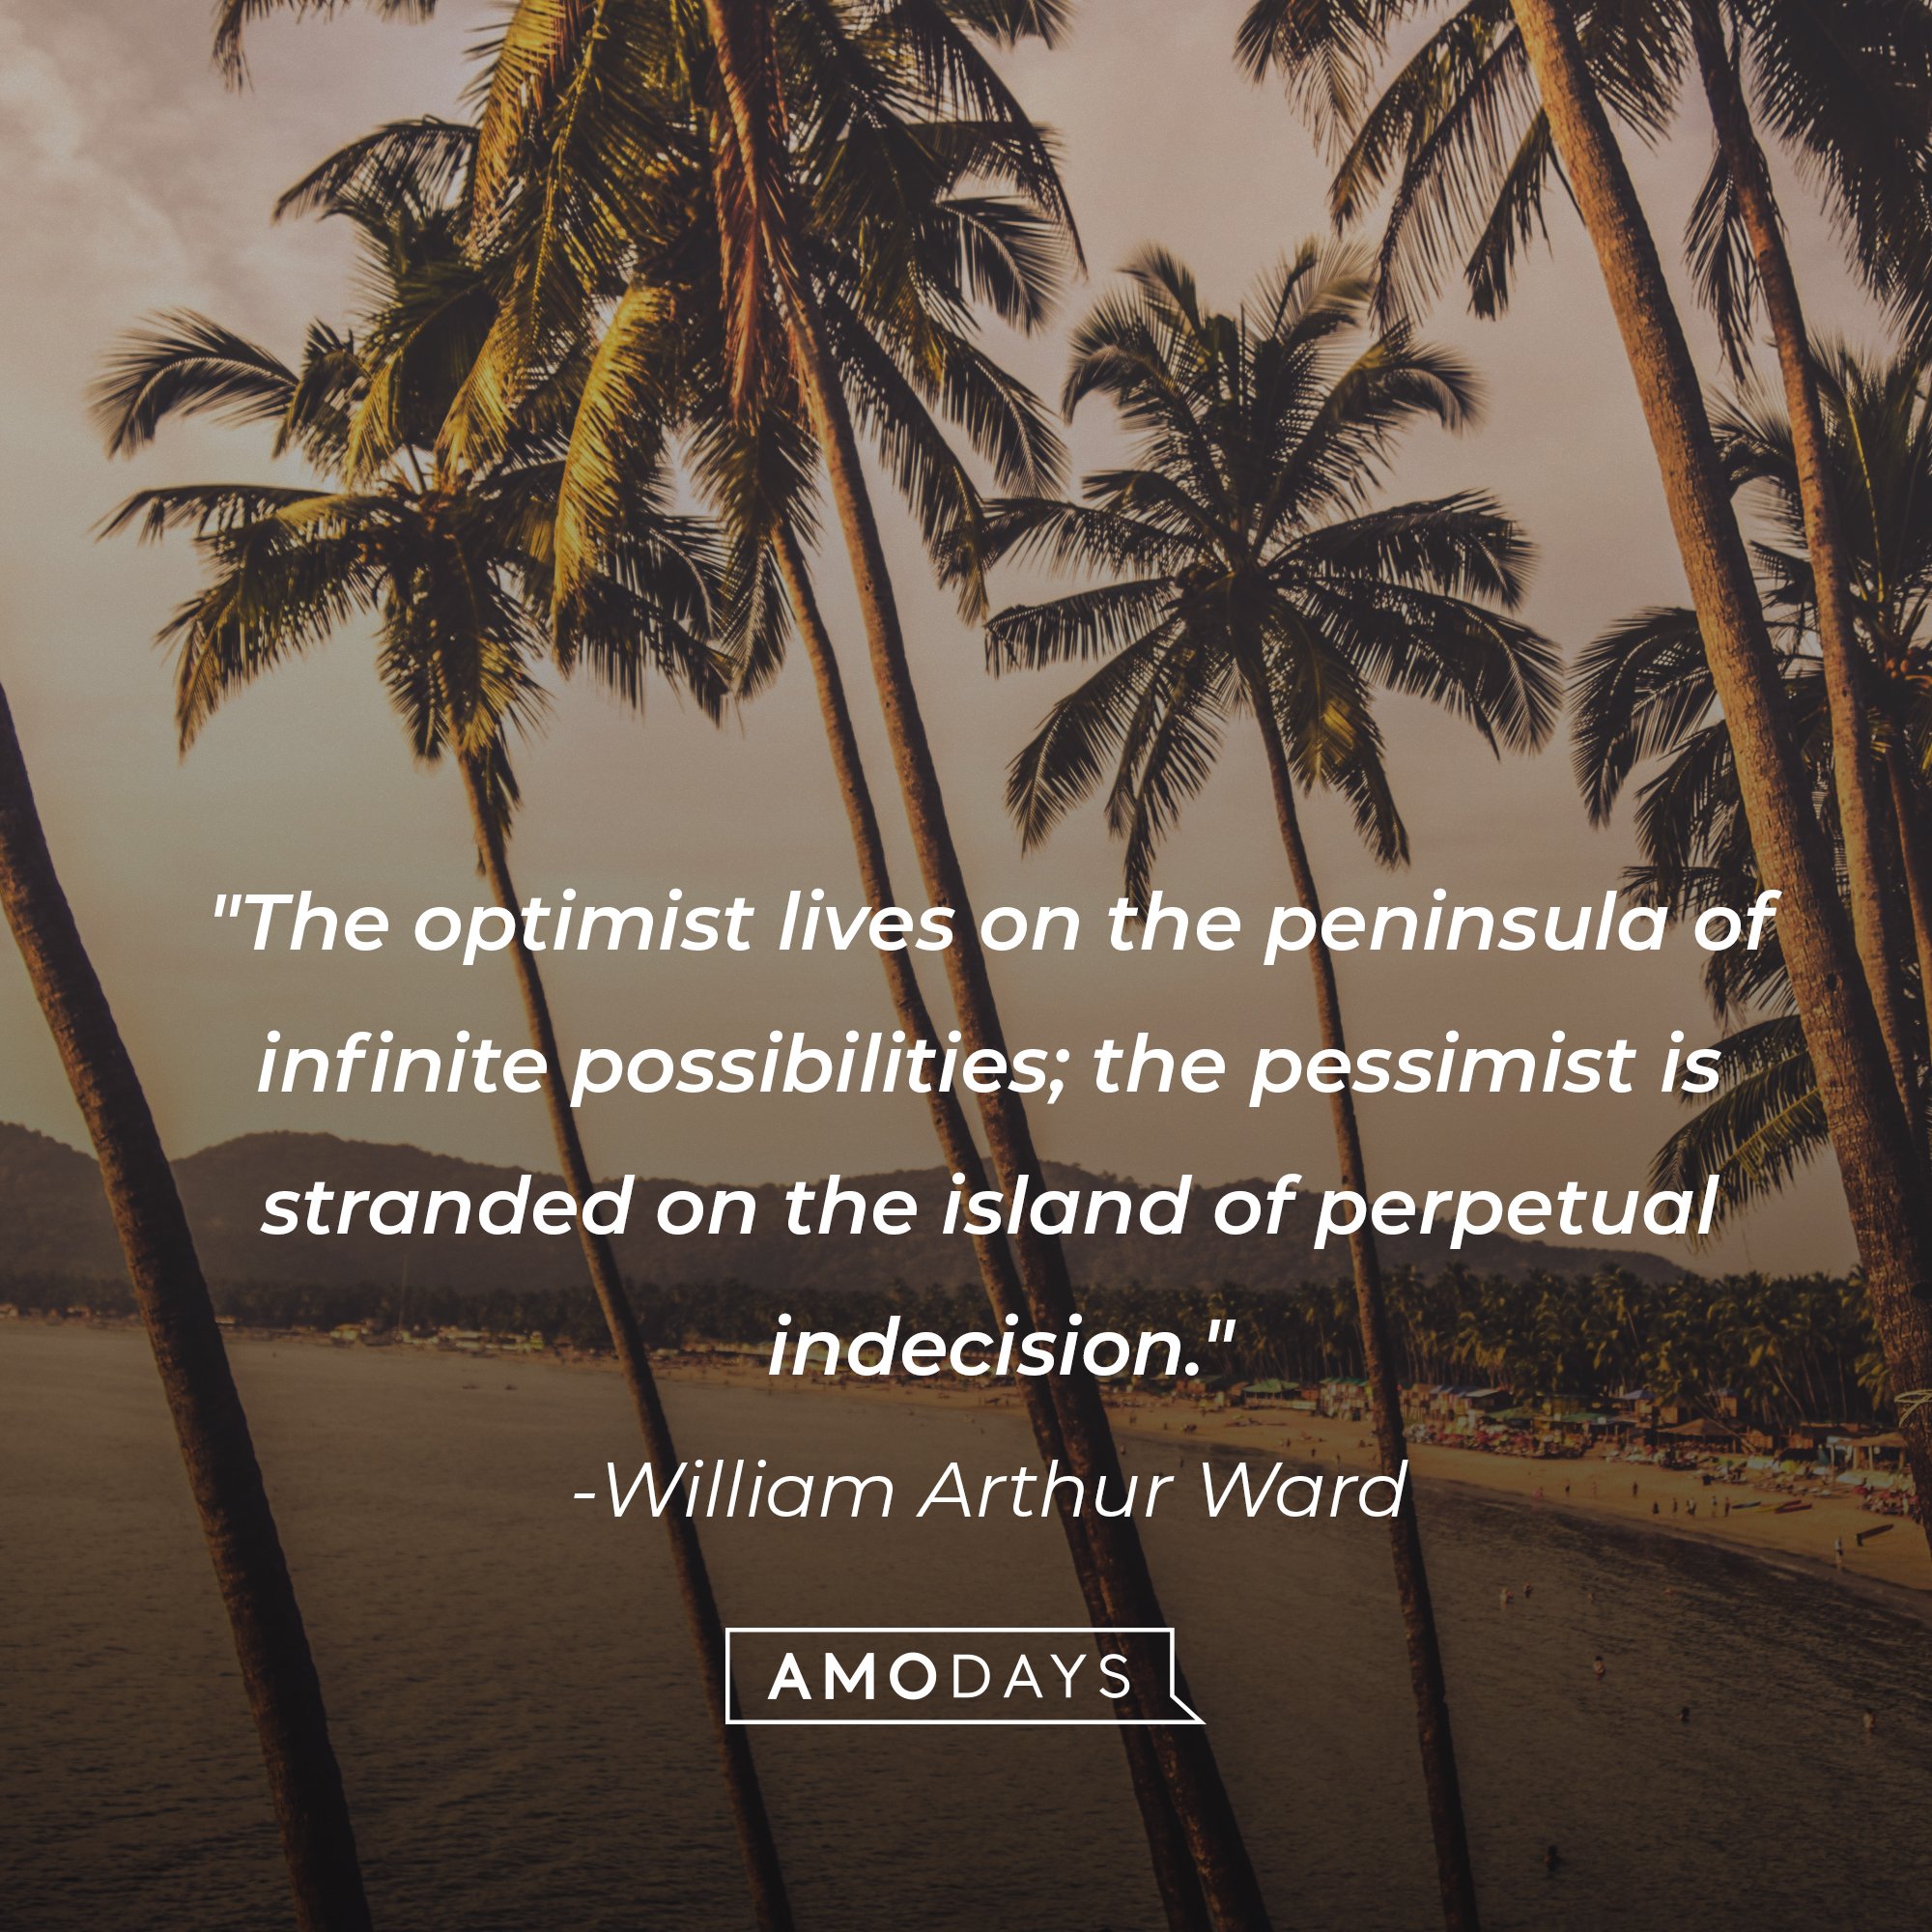 William Arthur Ward's quote: "The optimist lives on the peninsula of infinite possibilities; the pessimist is stranded on the island of perpetual indecision." | Image: AmoDays